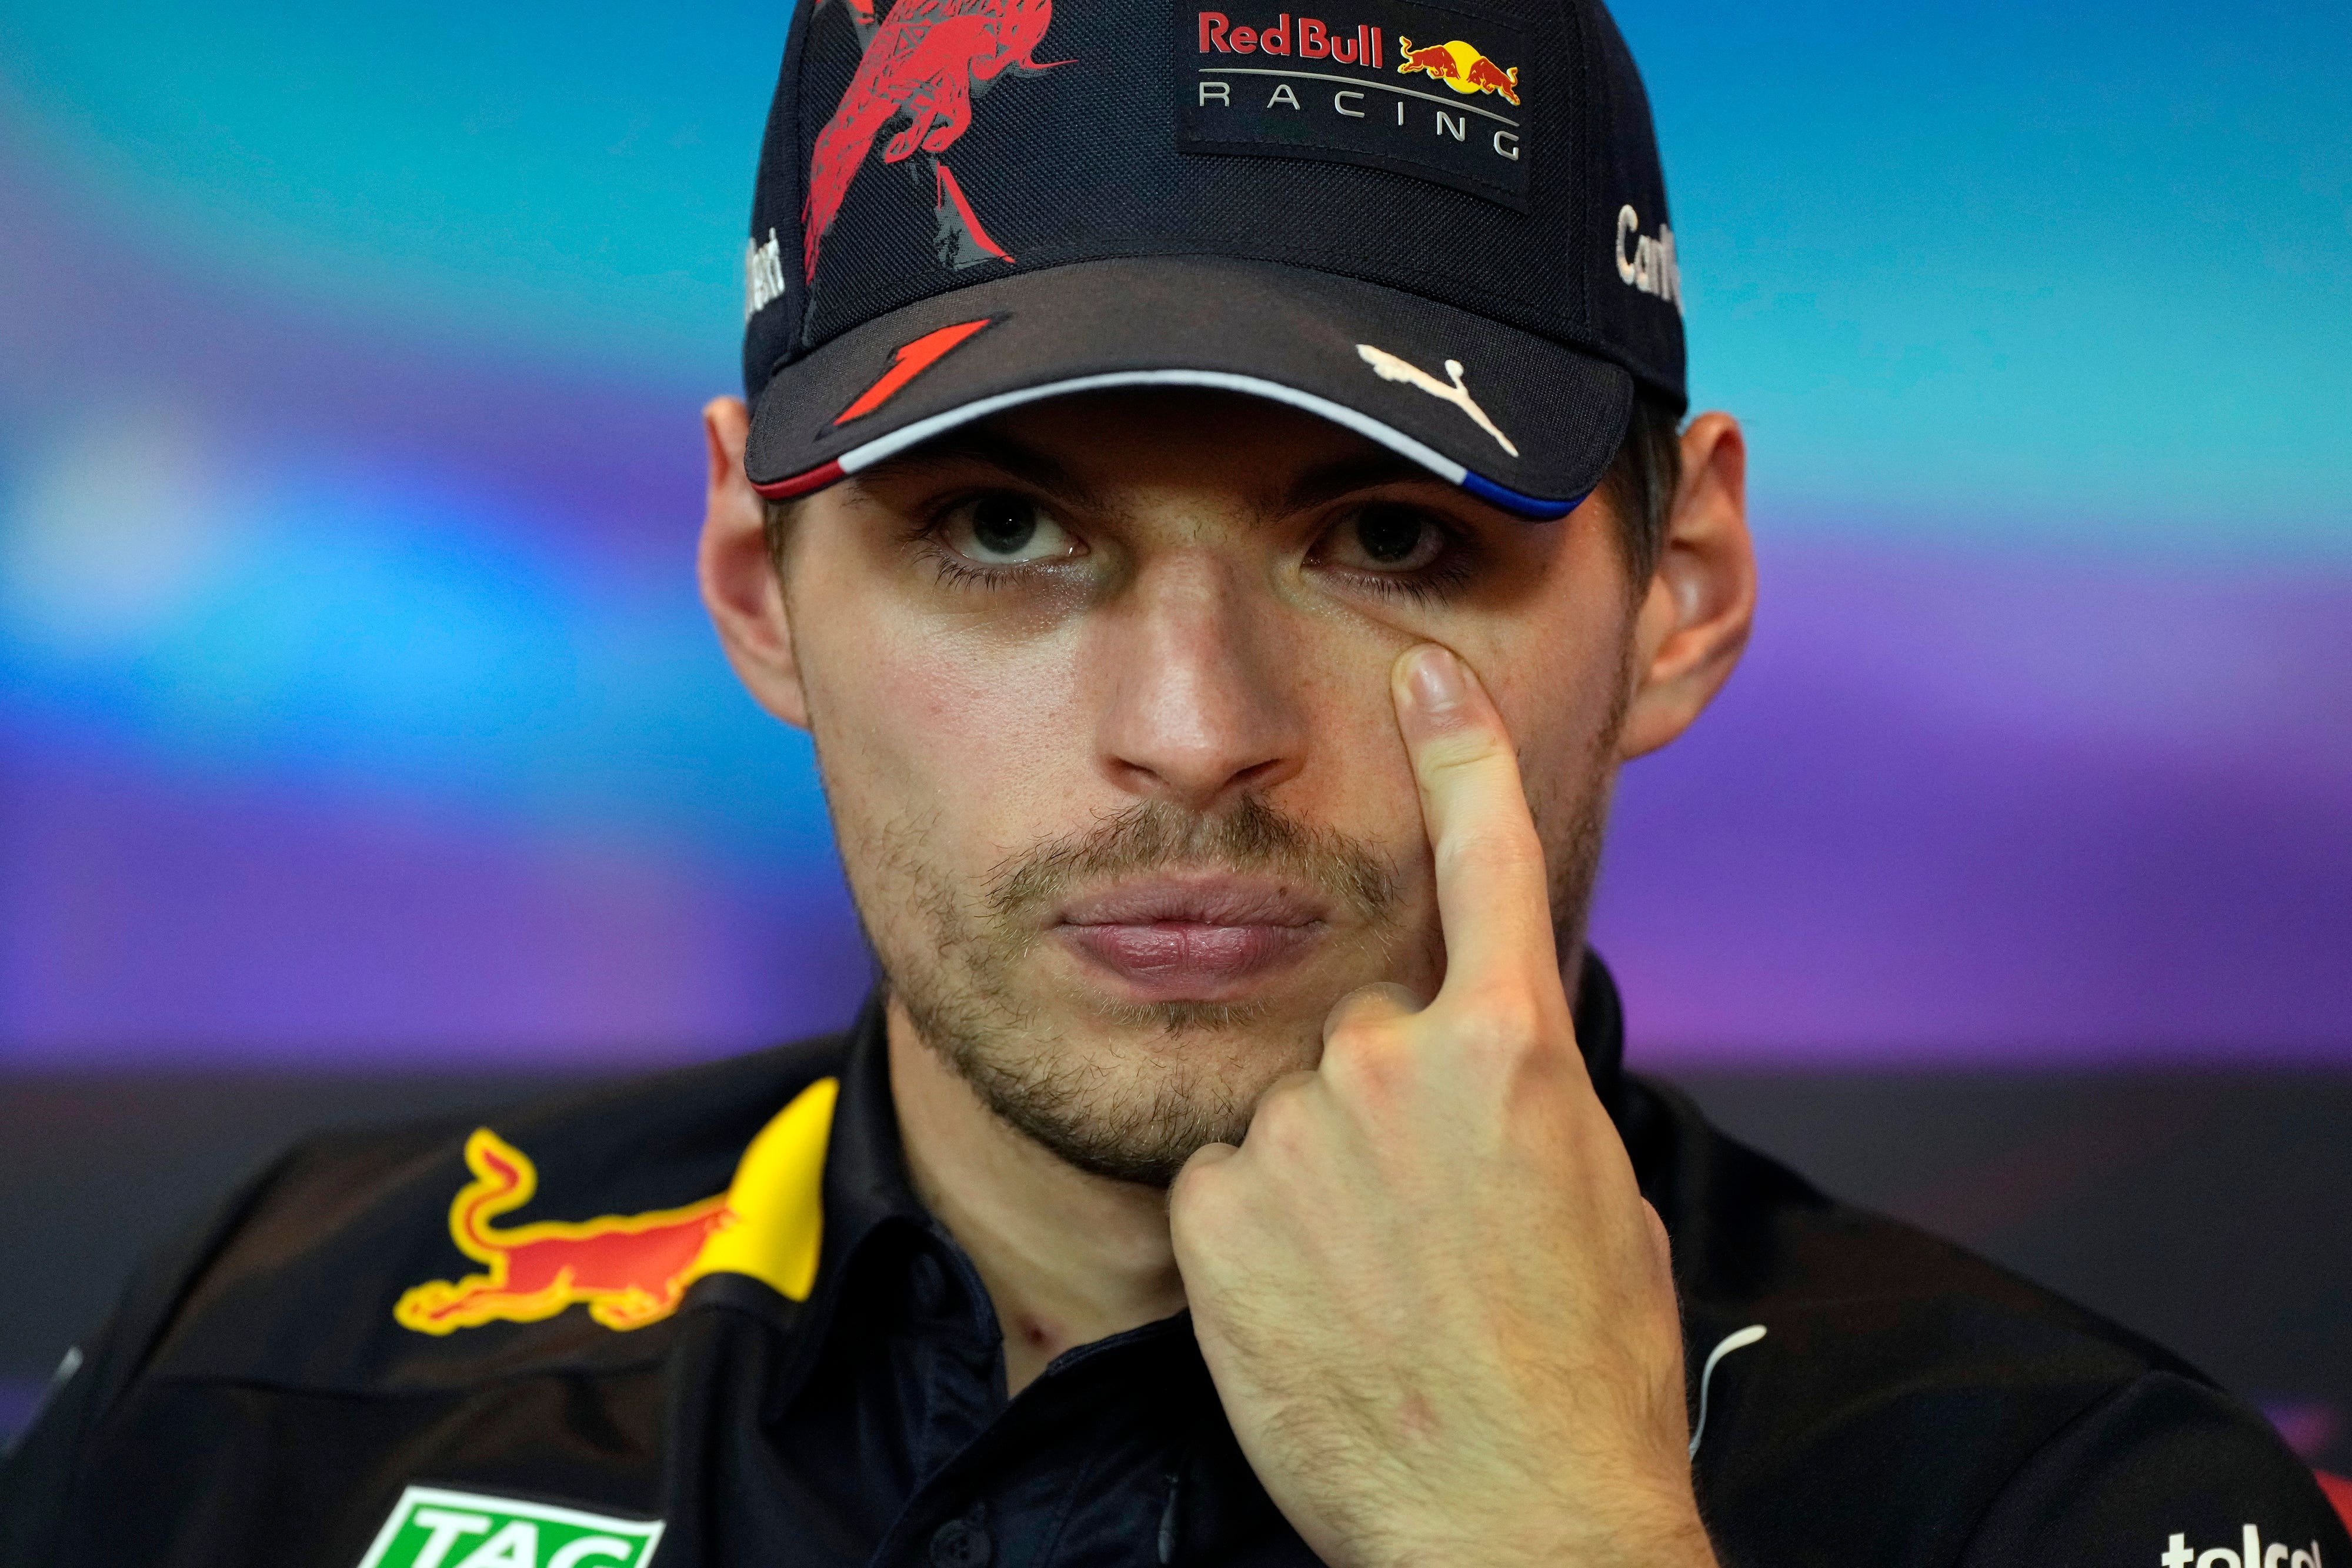 Verstappen: I should be allowed to criticise Red Bull for F1 mistakes